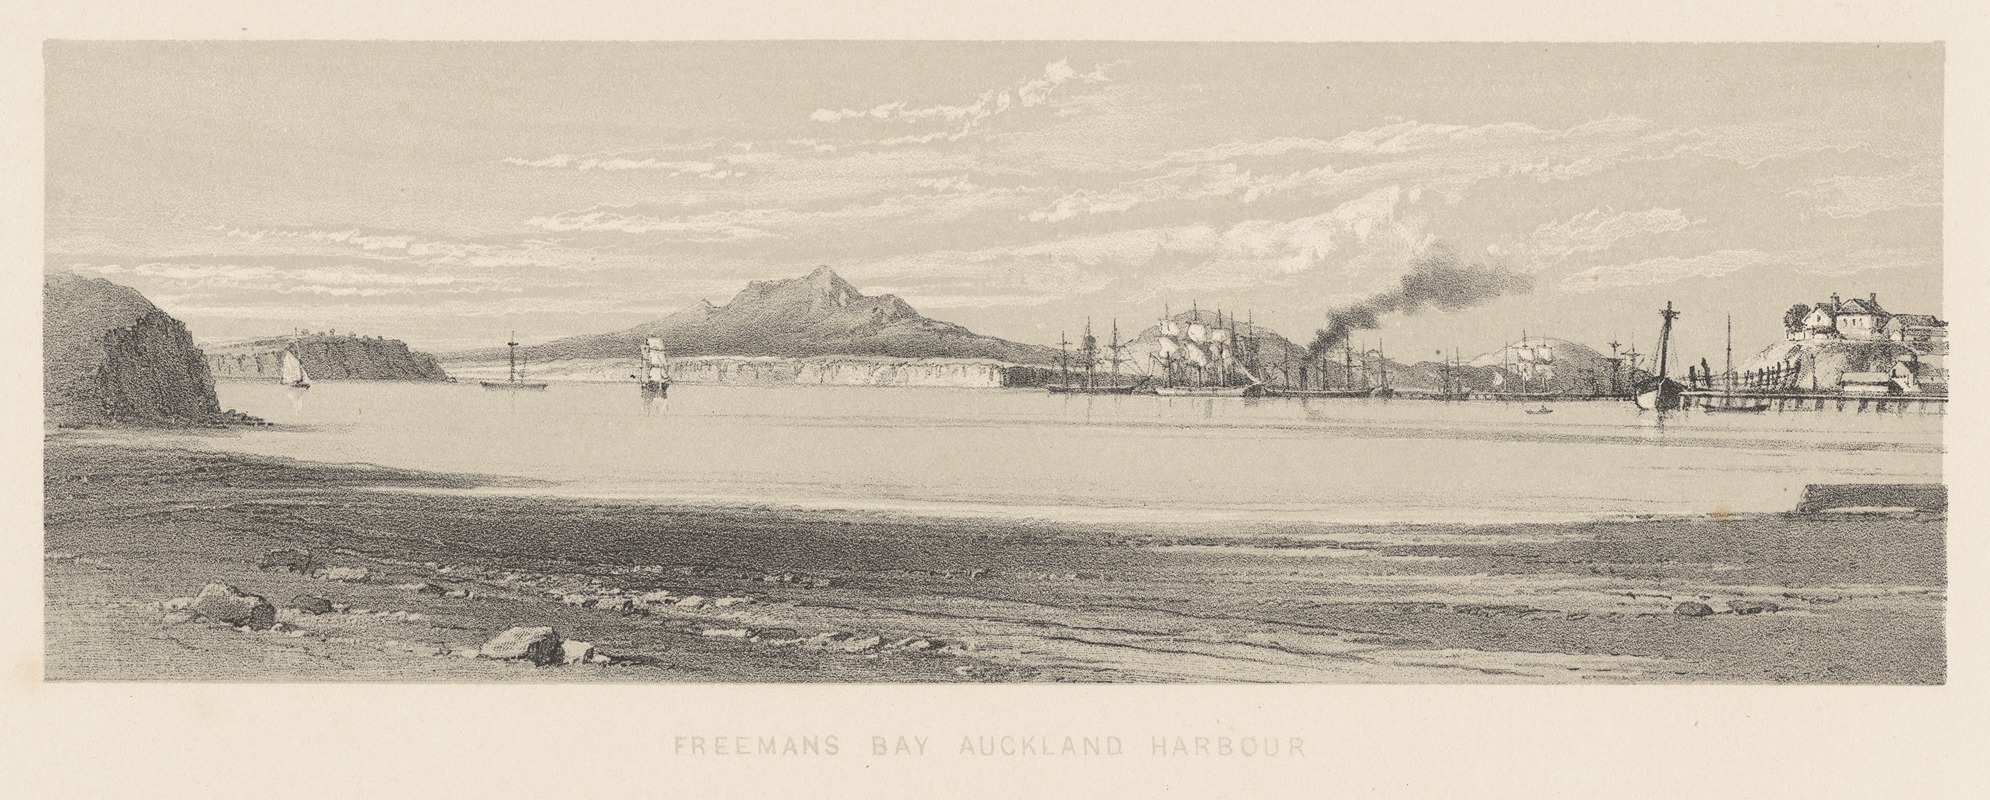 Charles Decimus Barraud - New Zealand Graphic and Descriptive. Plate III. Freeman’s Bay Auckland Harbour.